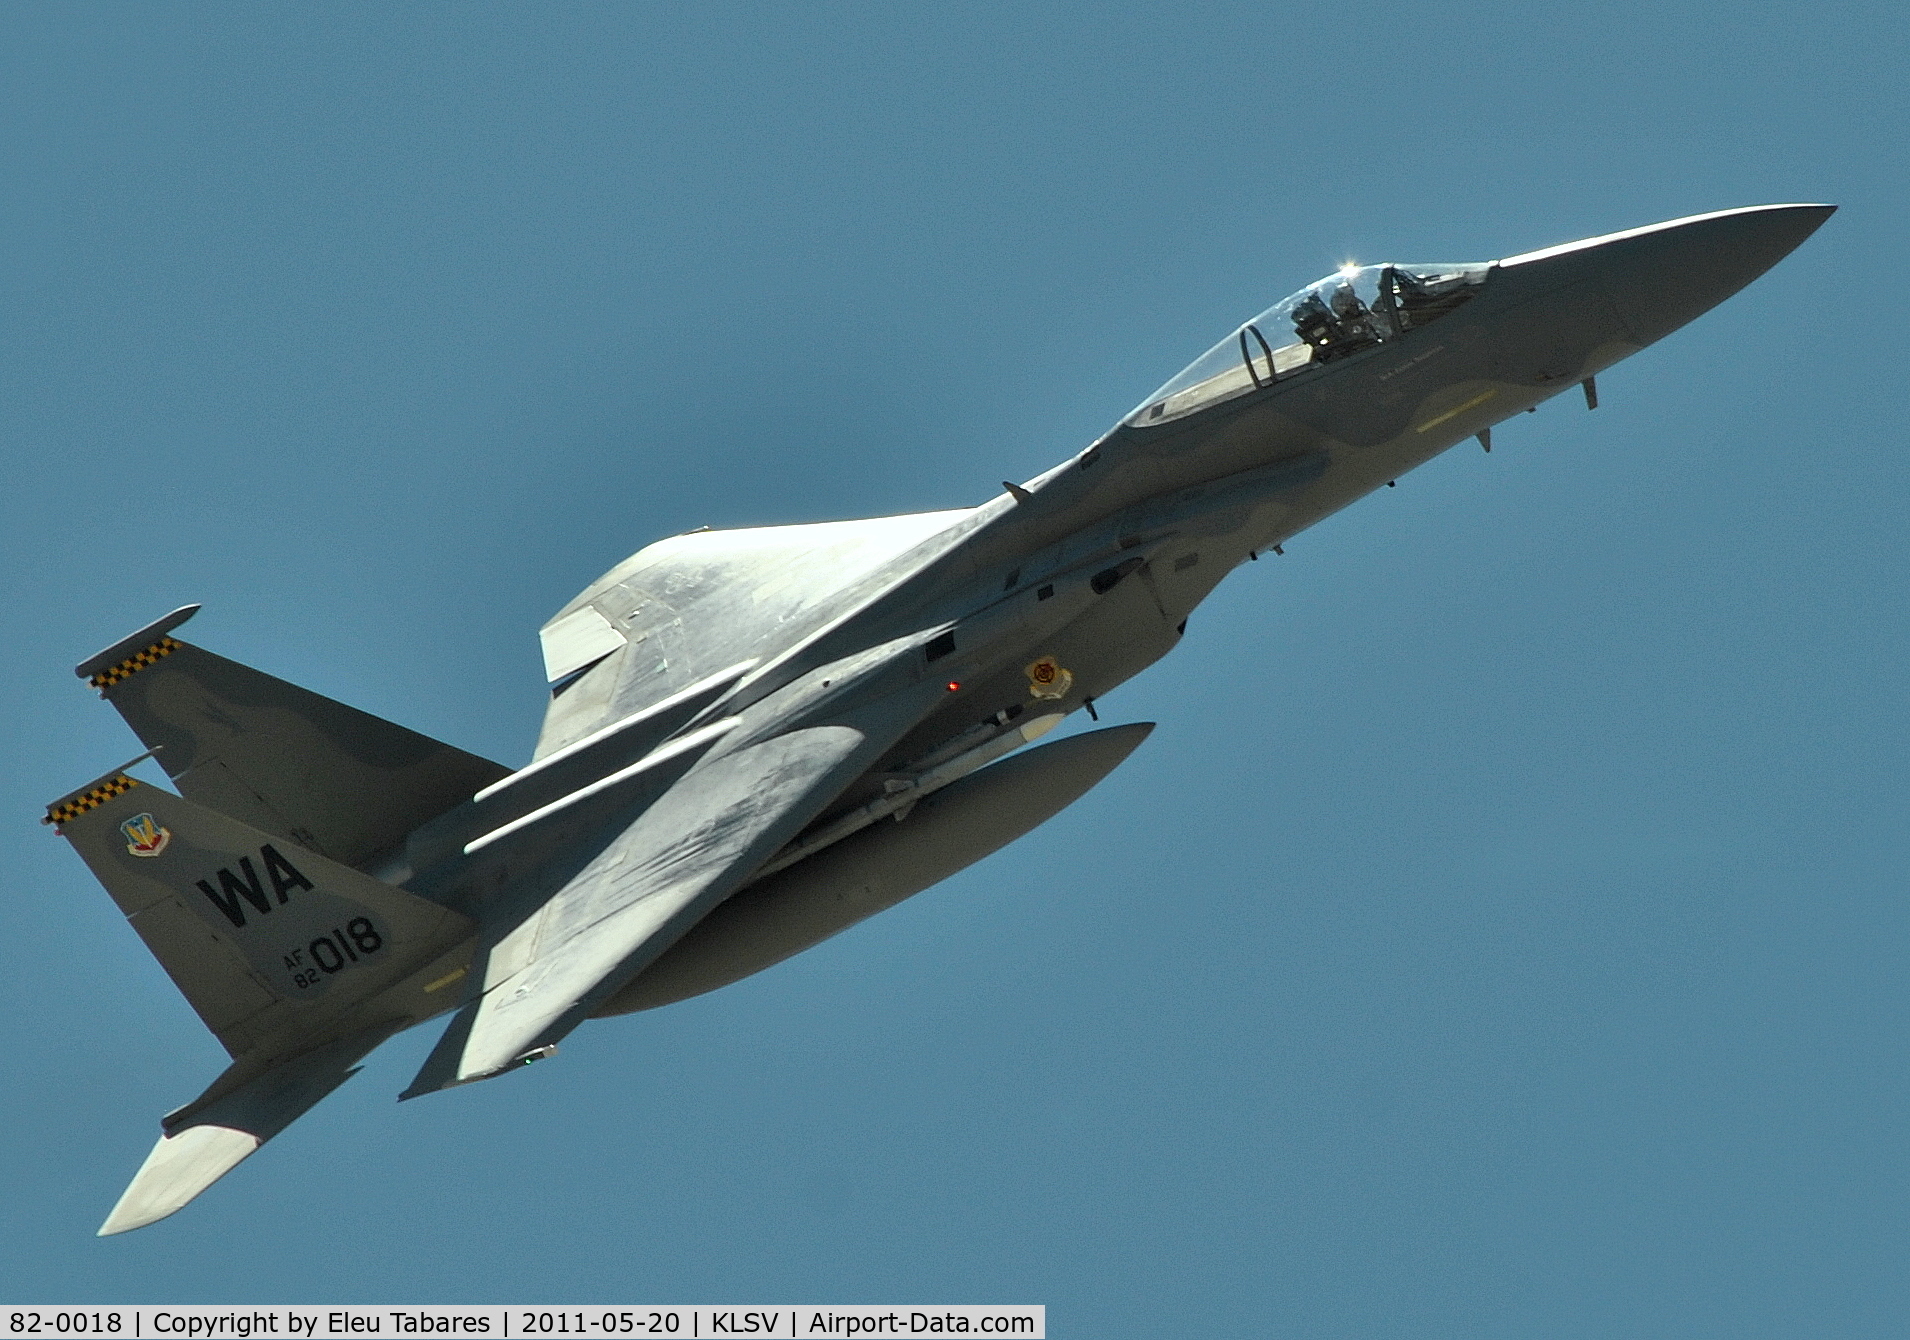 82-0018, McDonnell Douglas F-15C Eagle C/N 0831/C249, Taken during Green Flag Exercise at Nellis Air Force Base, Nevada.